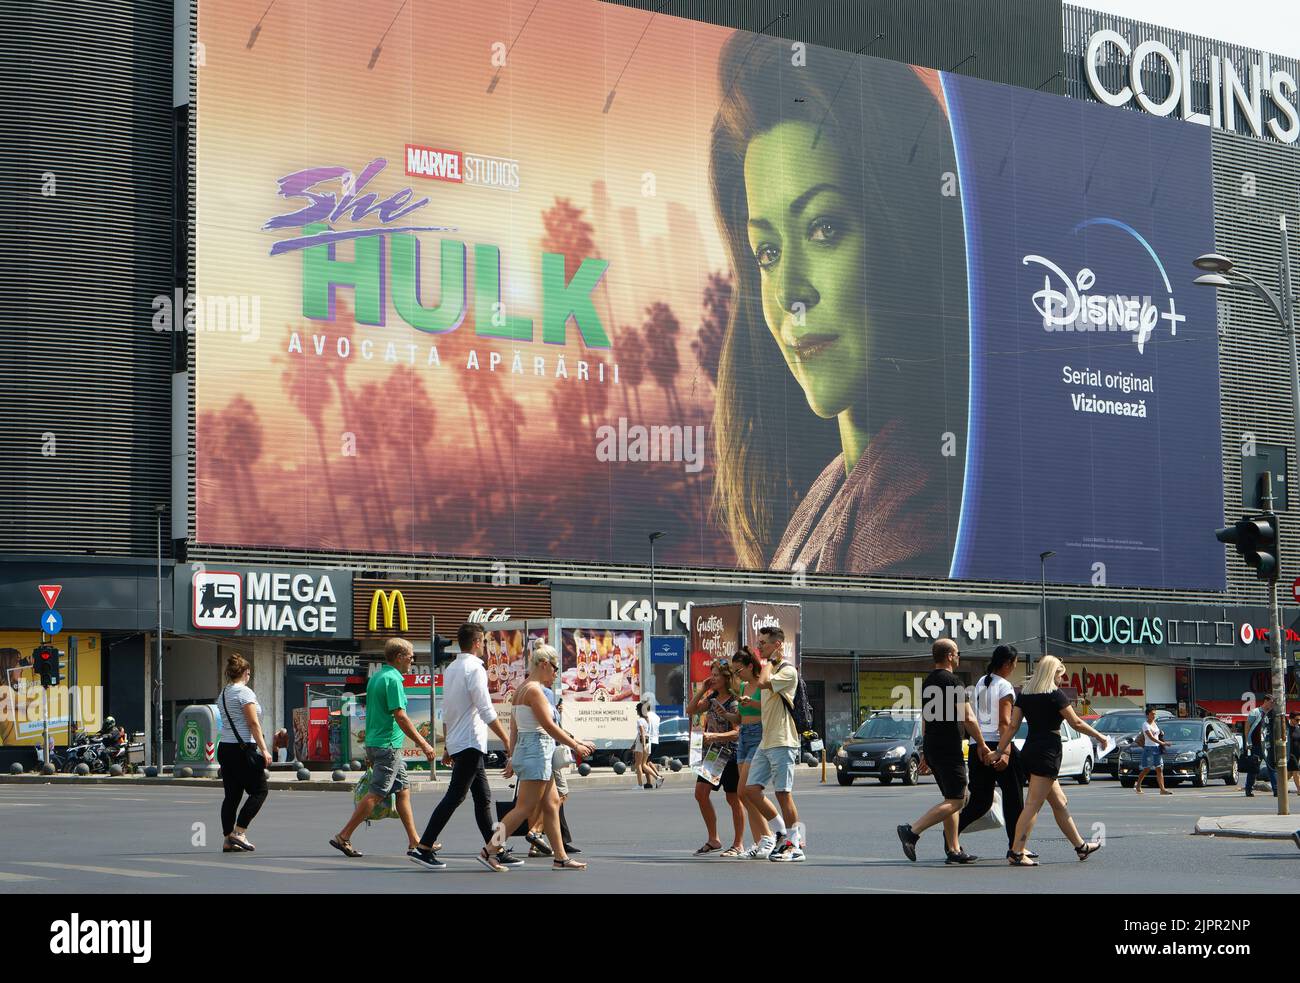 Bucharest, Romania - August 18, 2022: Extra large banner advertising She-Hulk: Attorney at Law TV Series is displayed on the Unirea Shopping Center, i Stock Photo